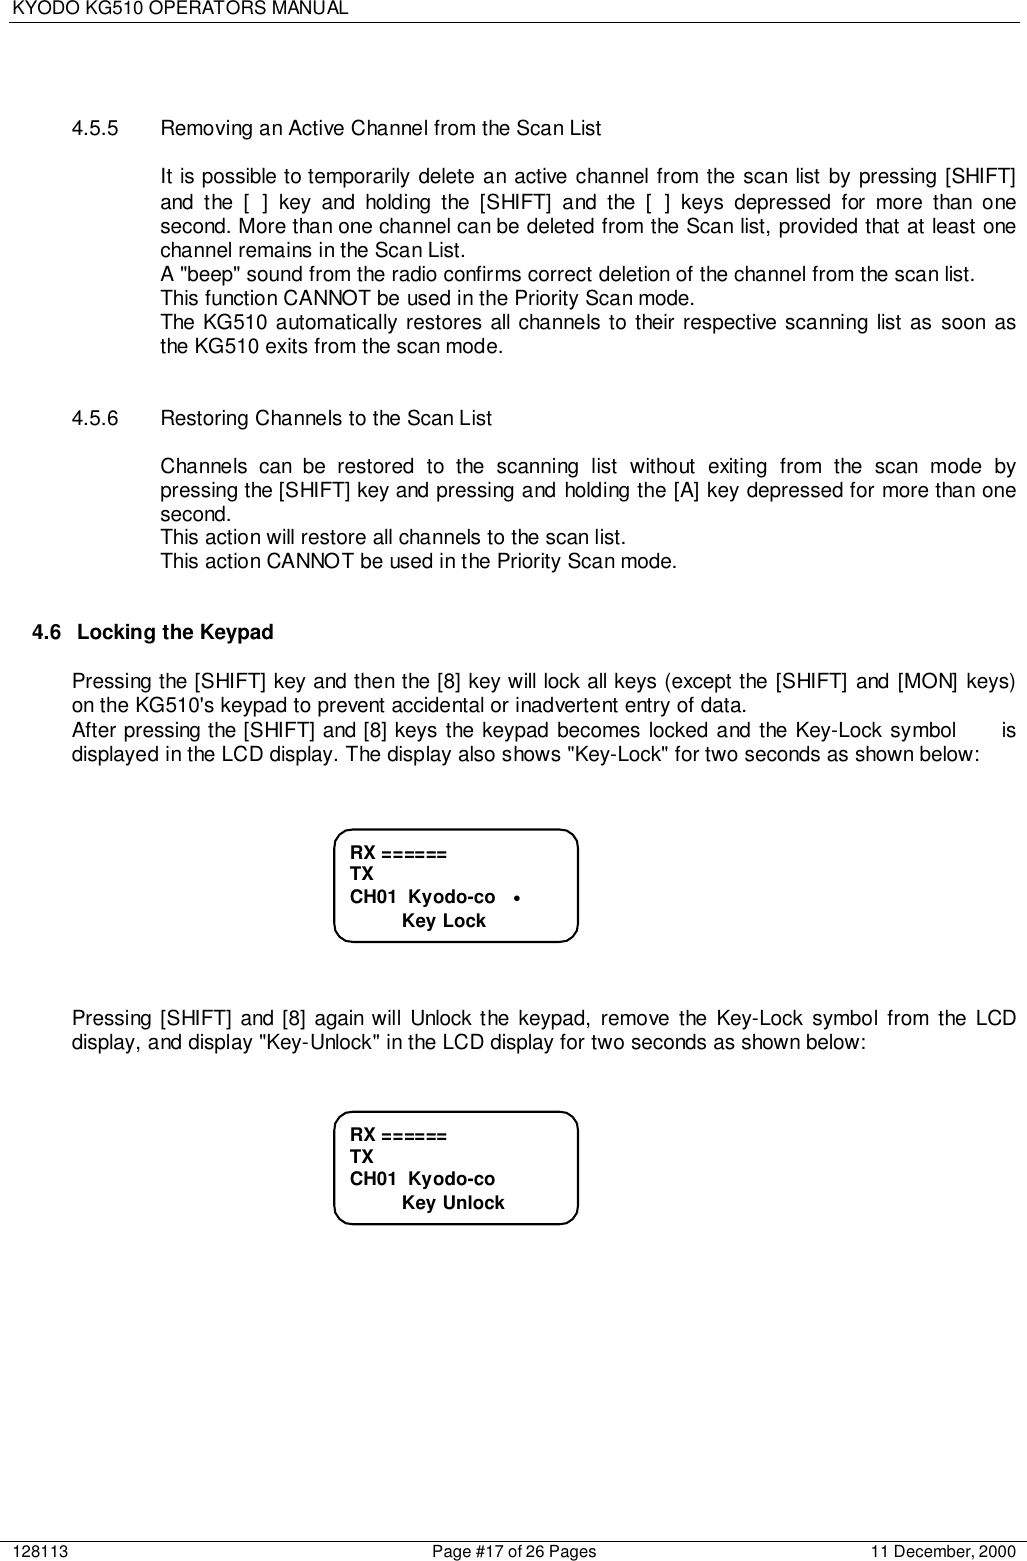 KYODO KG510 OPERATORS MANUAL128113 Page #17 of 26 Pages 11 December, 20004.5.5  Removing an Active Channel from the Scan ListIt is possible to temporarily delete an active channel from the scan list by pressing [SHIFT]and the [ ] key and holding the [SHIFT] and the [ ] keys depressed for more than onesecond. More than one channel can be deleted from the Scan list, provided that at least onechannel remains in the Scan List.A &quot;beep&quot; sound from the radio confirms correct deletion of the channel from the scan list.This function CANNOT be used in the Priority Scan mode.The KG510 automatically restores all channels to their respective scanning list as soon asthe KG510 exits from the scan mode.4.5.6  Restoring Channels to the Scan ListChannels can be restored to the scanning list without exiting from the scan mode bypressing the [SHIFT] key and pressing and holding the [A] key depressed for more than onesecond.This action will restore all channels to the scan list.This action CANNOT be used in the Priority Scan mode.4.6  Locking the KeypadPressing the [SHIFT] key and then the [8] key will lock all keys (except the [SHIFT] and [MON] keys)on the KG510&apos;s keypad to prevent accidental or inadvertent entry of data.After pressing the [SHIFT] and [8] keys the keypad becomes locked and the Key-Lock symbol     isdisplayed in the LCD display. The display also shows &quot;Key-Lock&quot; for two seconds as shown below:Pressing [SHIFT] and [8] again will Unlock the keypad, remove the Key-Lock symbol from the LCDdisplay, and display &quot;Key-Unlock&quot; in the LCD display for two seconds as shown below:RX ======TXCH01  Kyodo-co          Key UnlockRX ======TXCH01  Kyodo-co   •          Key Lock